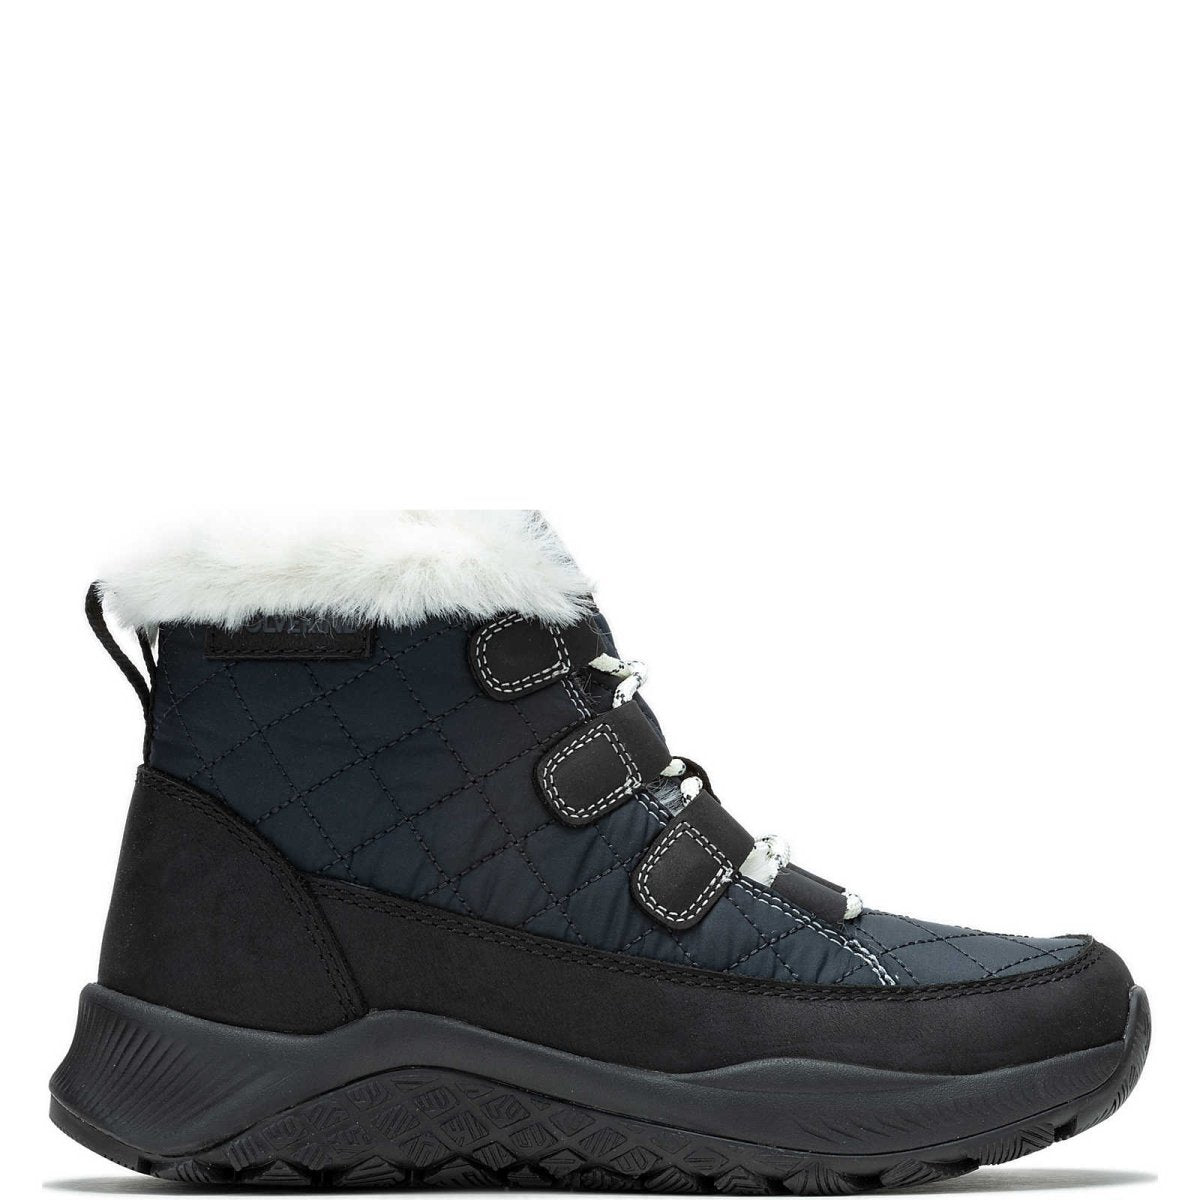 WOLVERINE LUTON QUILTED WOMEN'S WATERPROOF INSULATED MID HIKER (W880425) IN BLACK - TLW Shoes